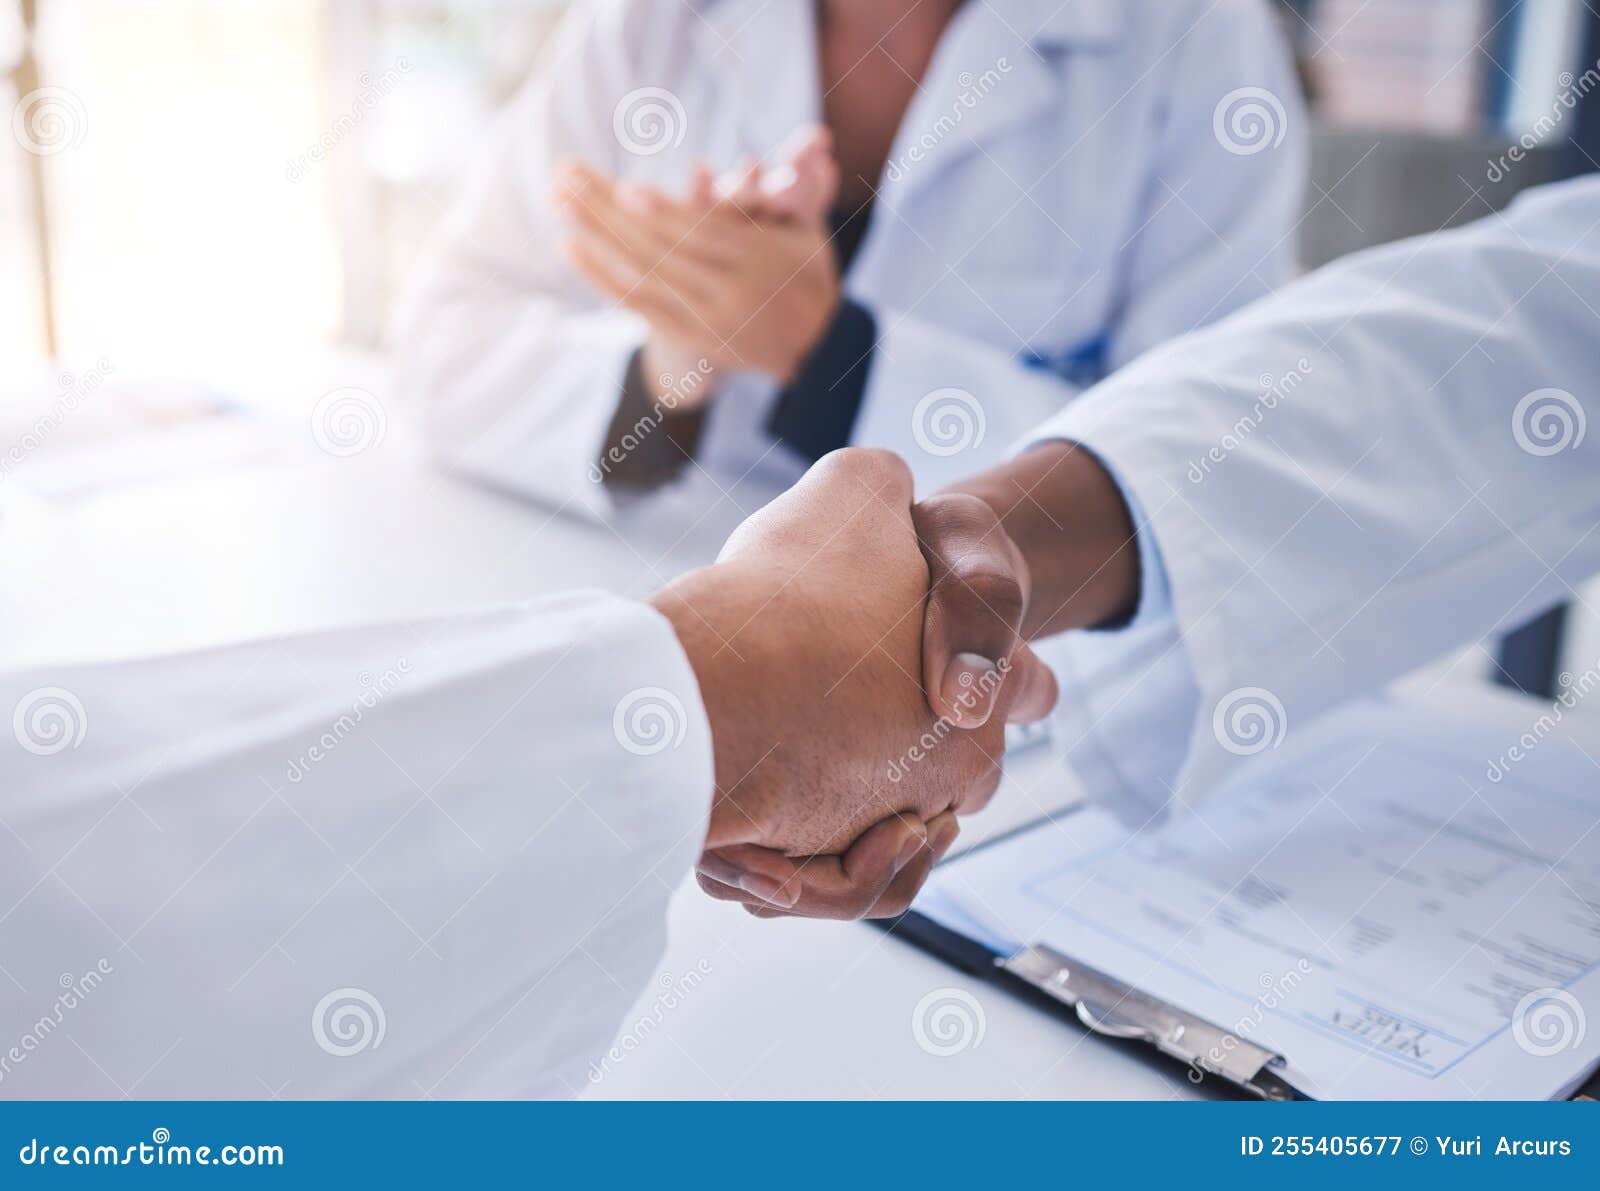 science partnership agreement, handshake innovation deal and research laboratory scientist contract. medical teamwork